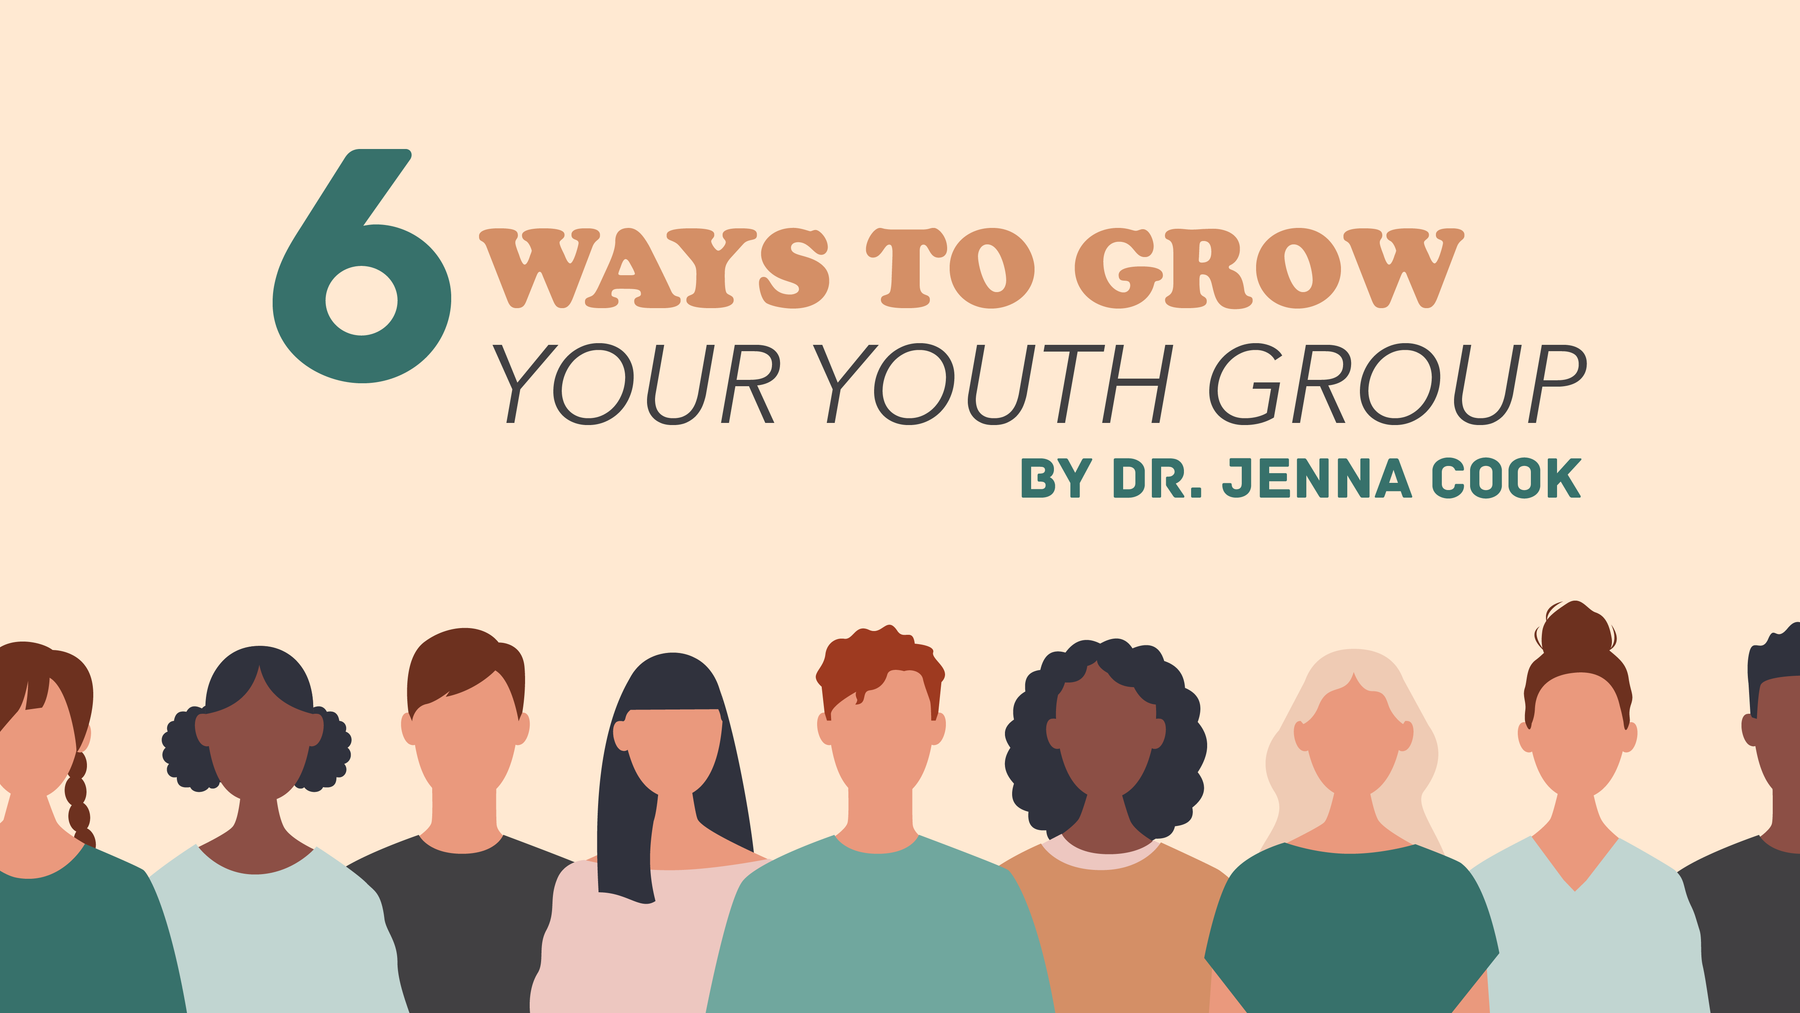 6 Ways to Grow Your Youth Group